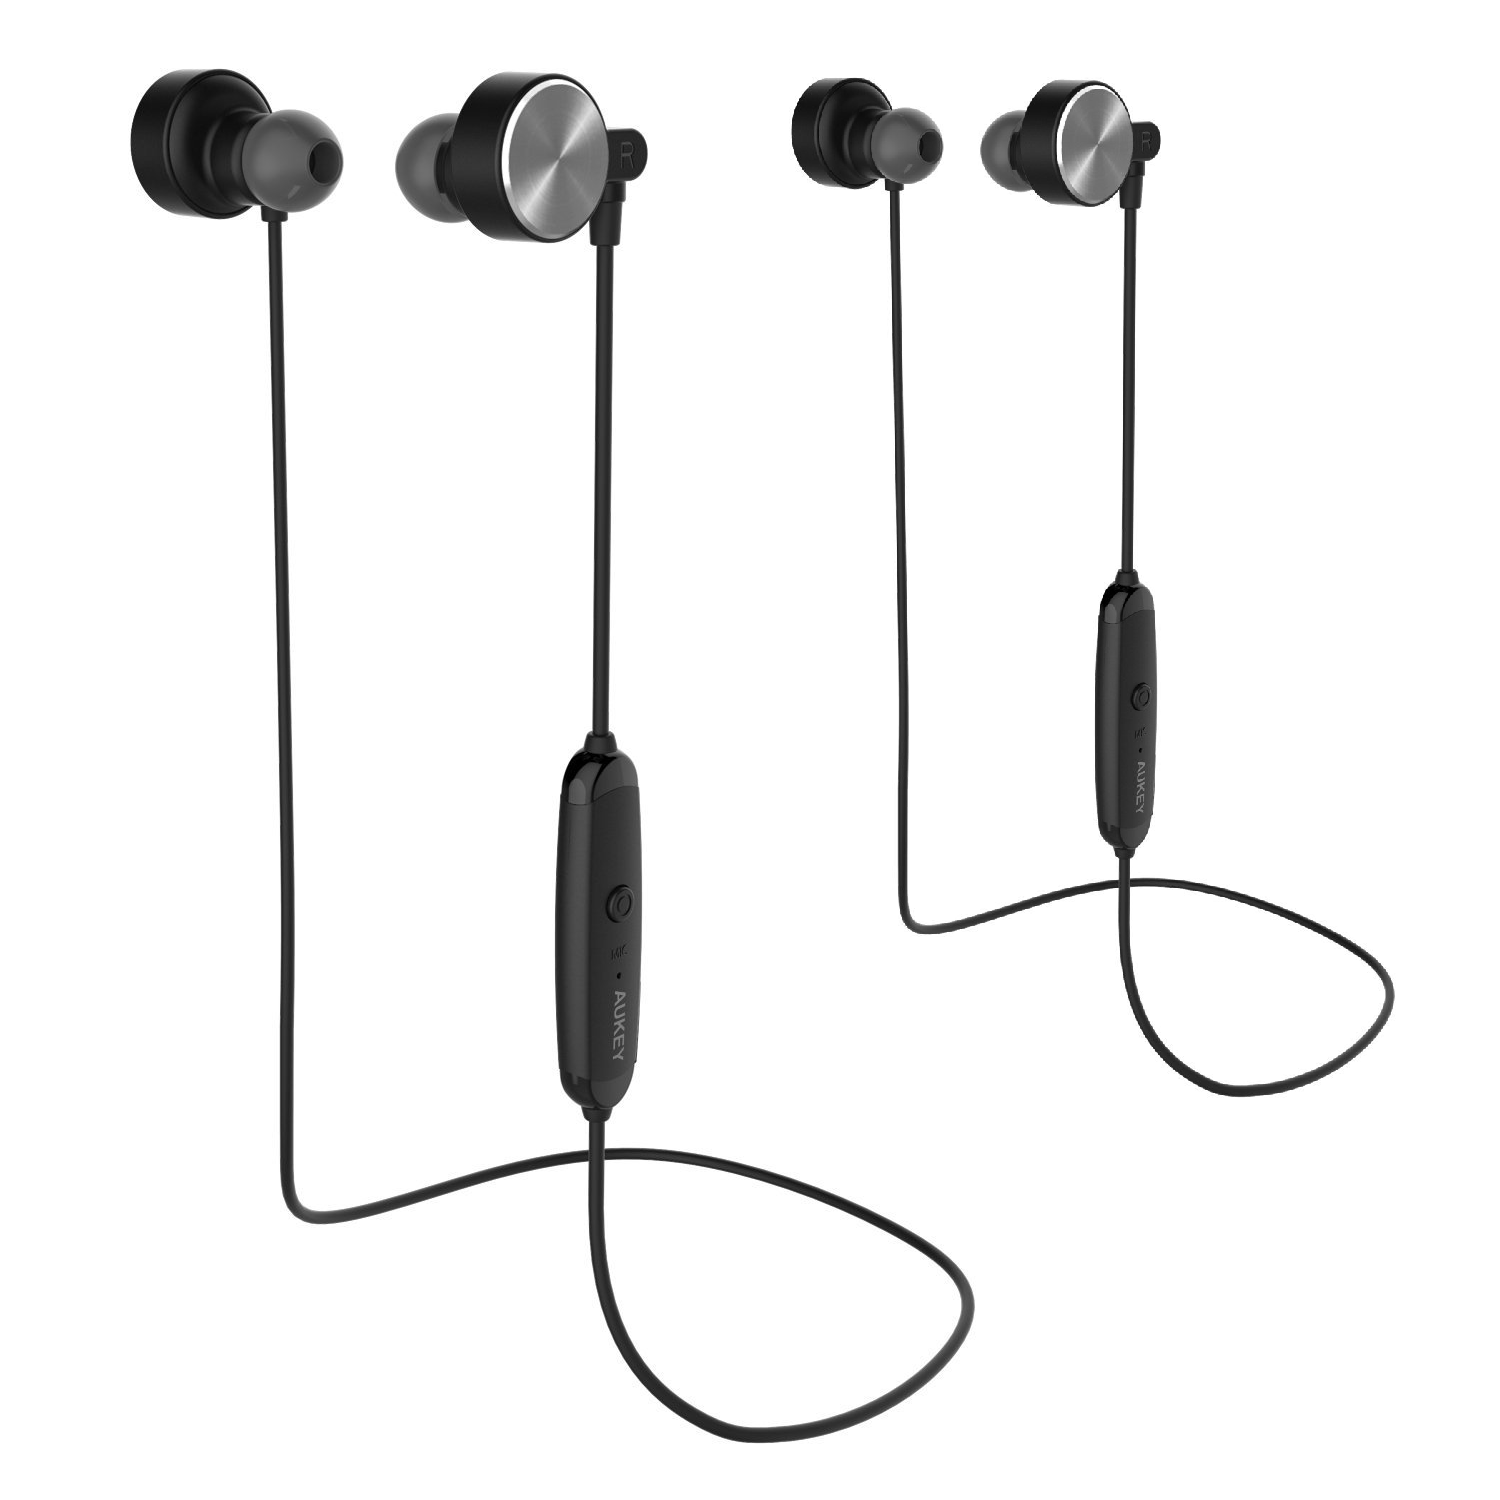 Save 50% Off Earbuds on Amazon! AUKEY Bluetooth Headphones ONLY $10.00!